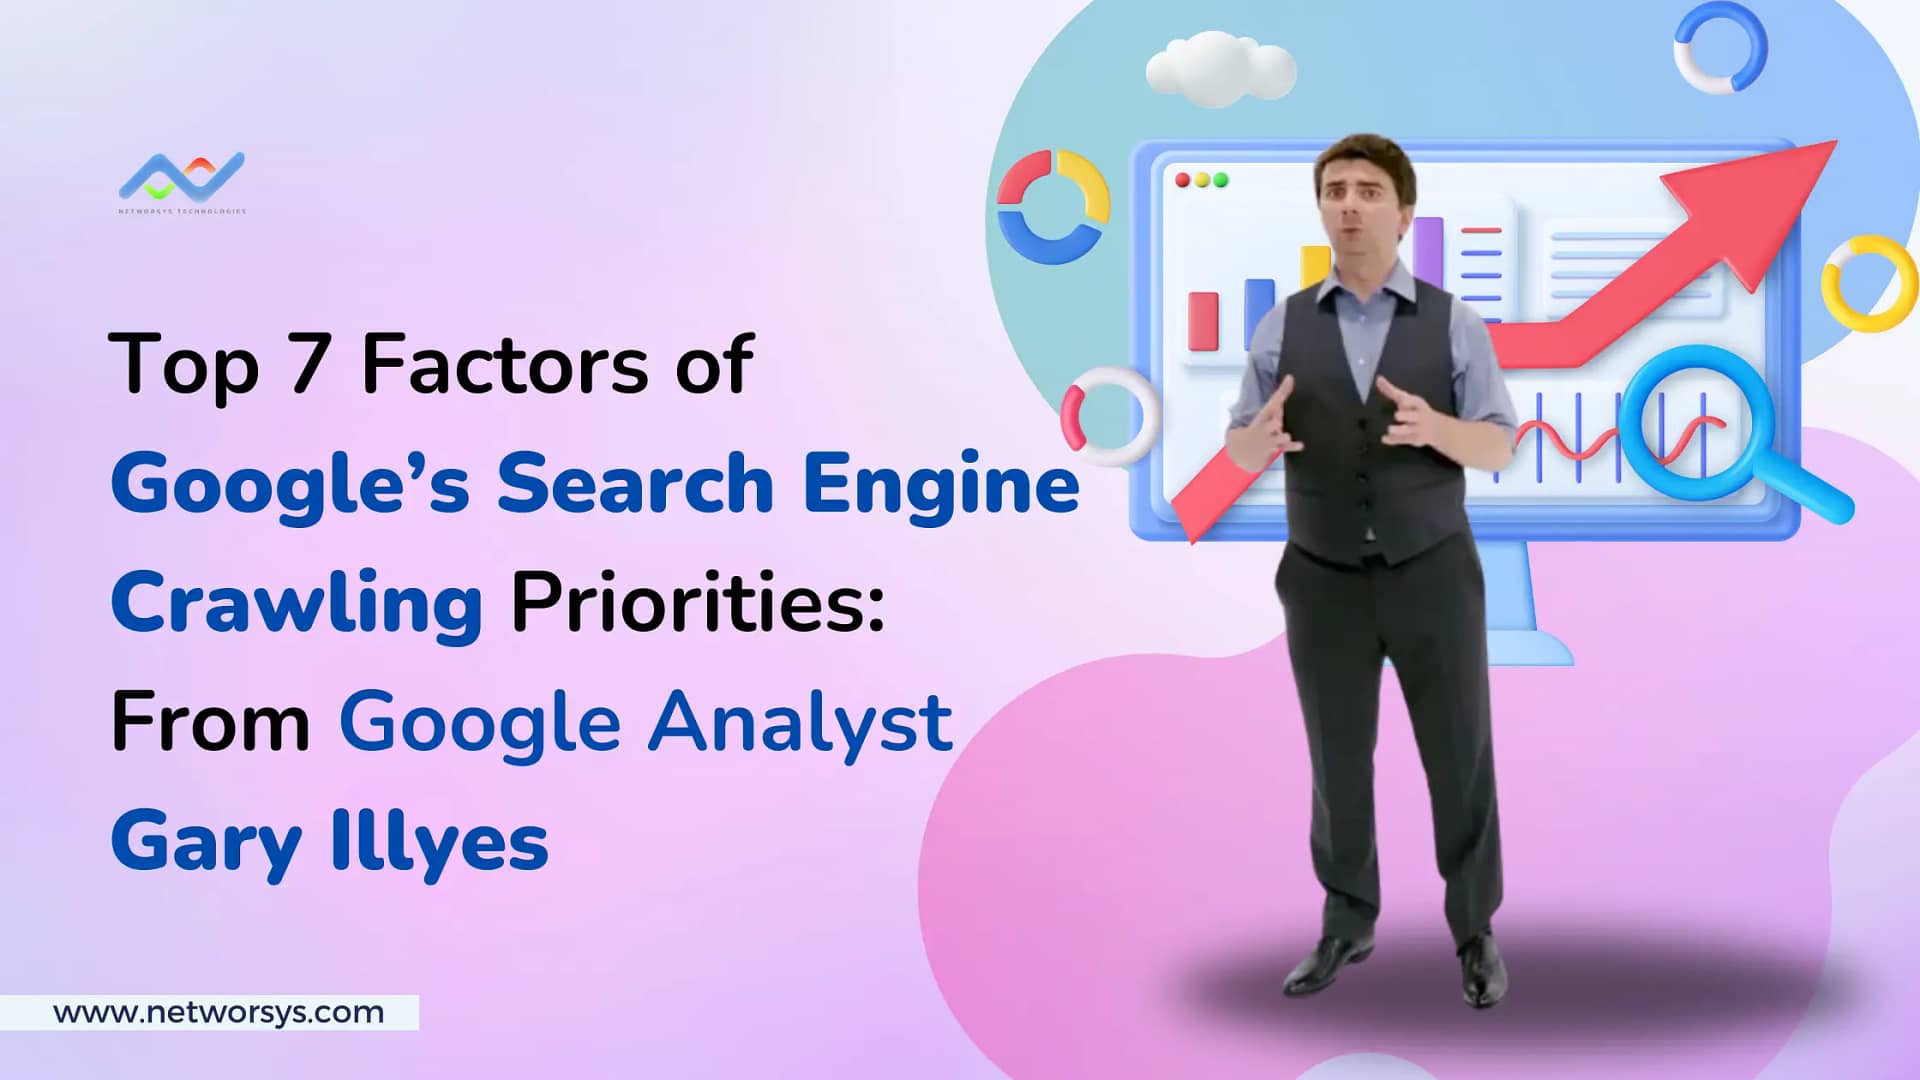 Top 7 Factors of Google’s Search Engine Crawling Priorities From Google Analyst Gary Illyes